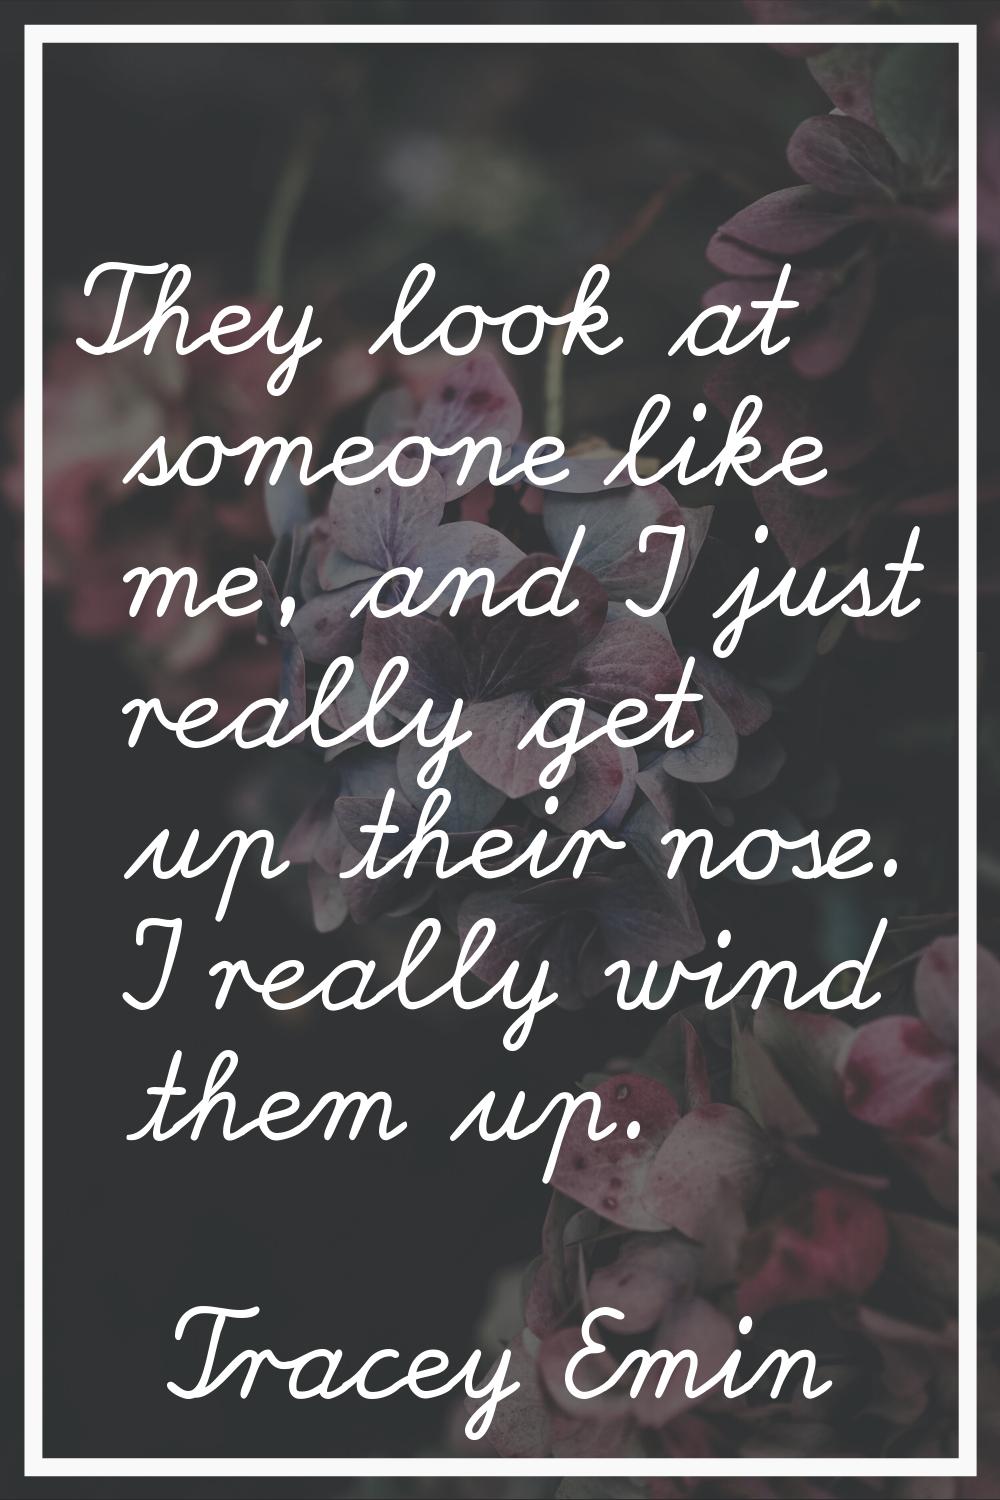 They look at someone like me, and I just really get up their nose. I really wind them up.